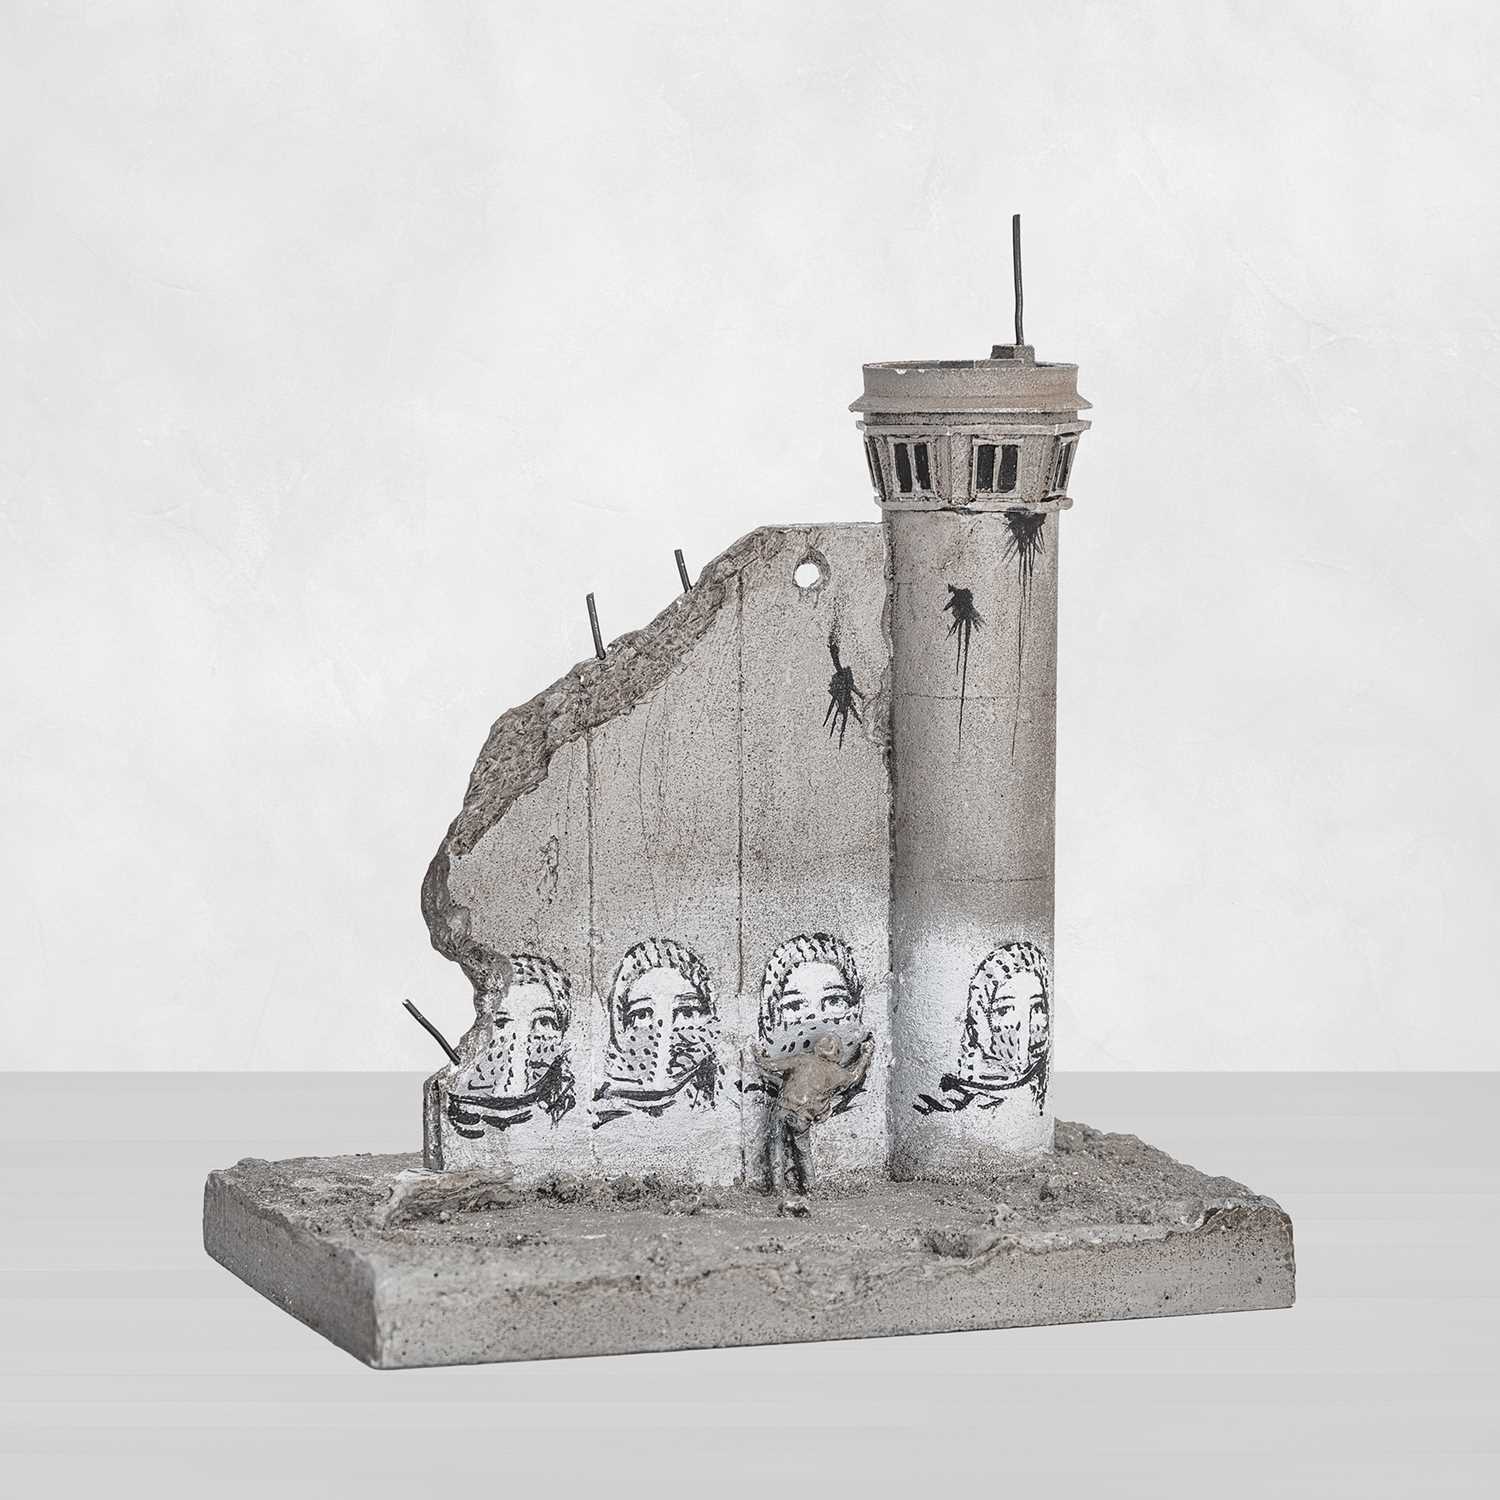 Lot 72 - Banksy (British 1974-), Walled Off Hotel - Four-Part Souvenir Wall Section With Watch Tower